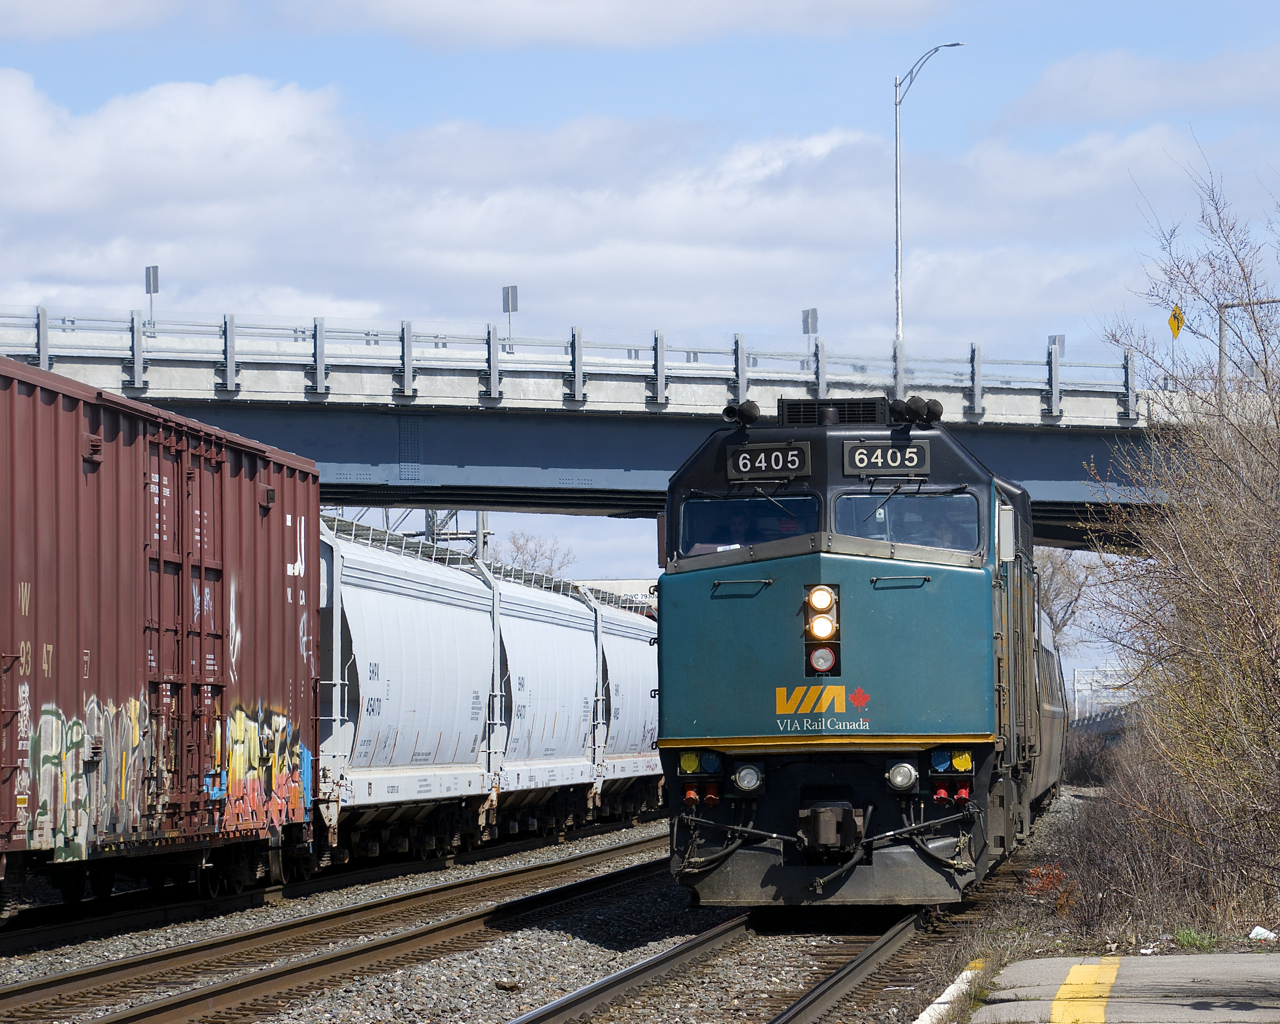 With CN 368 heading east at right, VIA 635 with VIA 6405 leading arrives at Dorval Station.